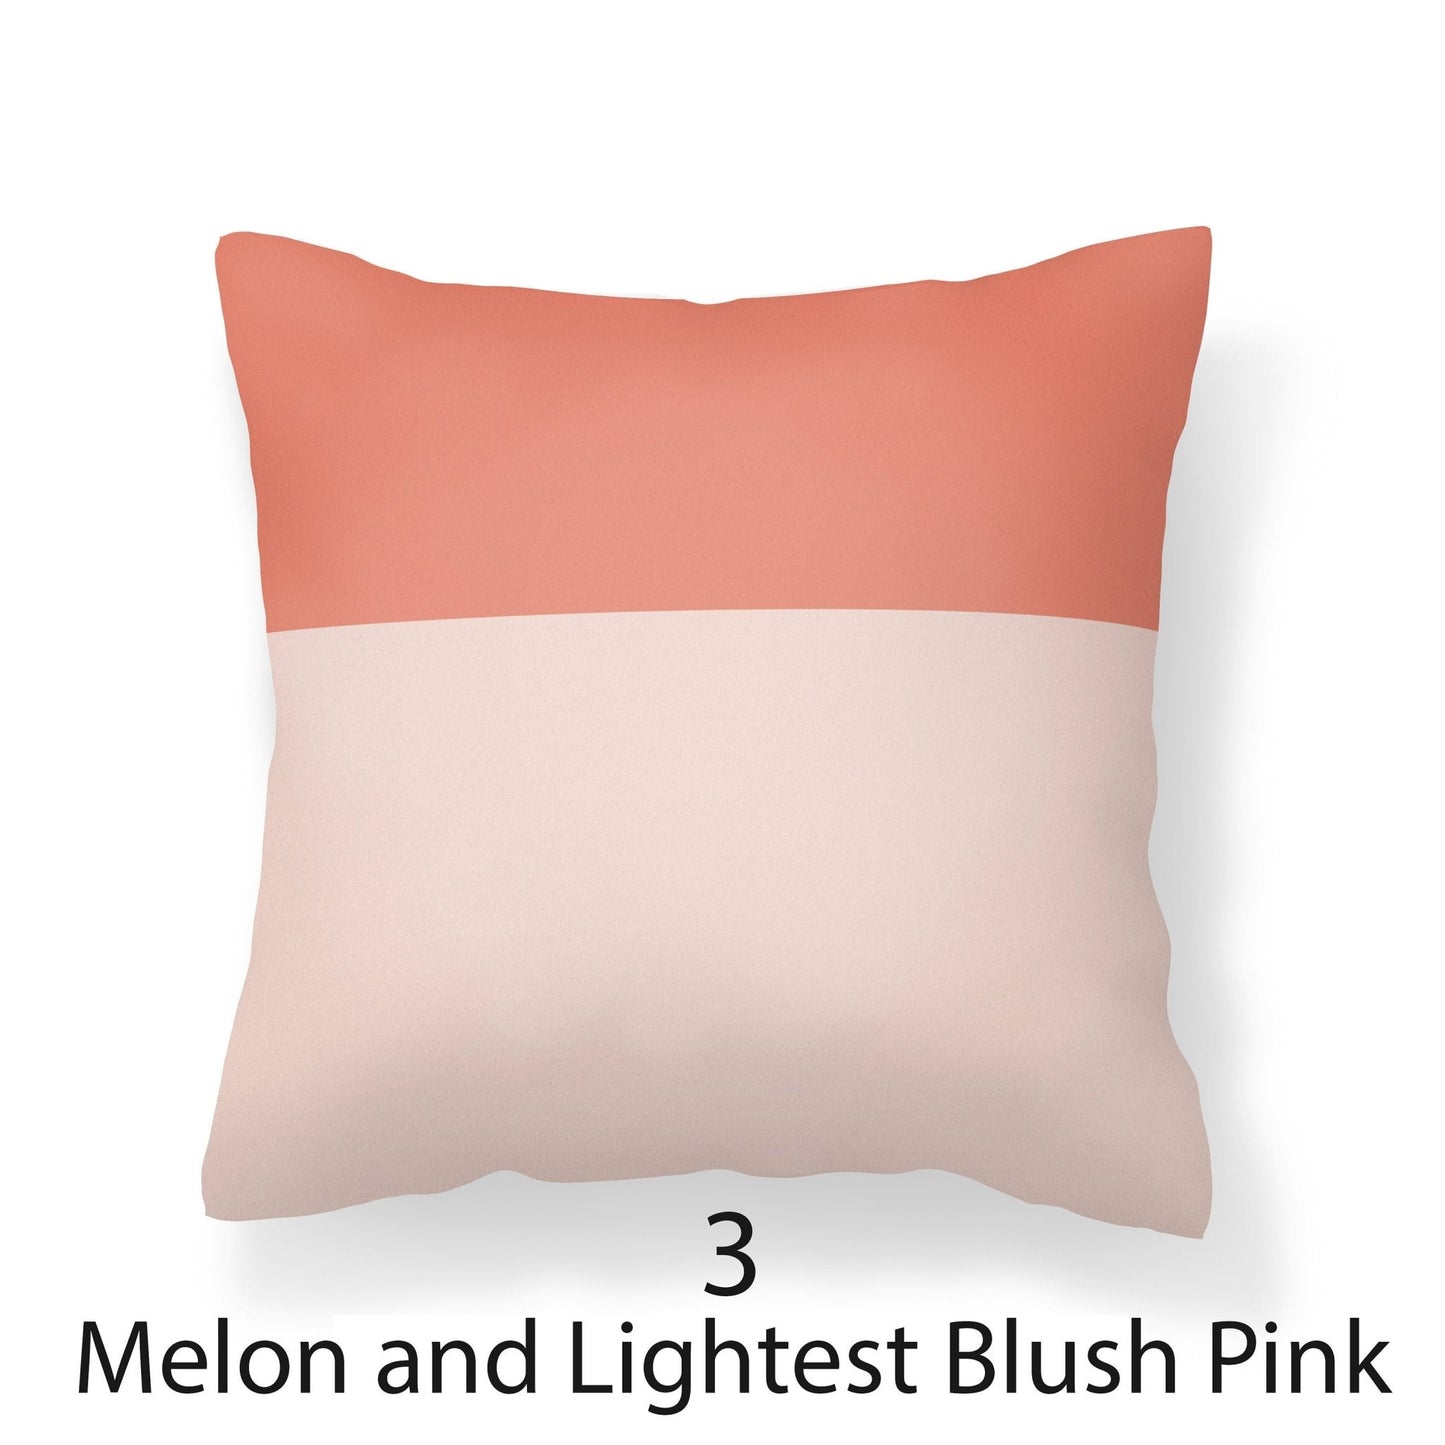 Blush Pink Pillow Cases - Mix and Match